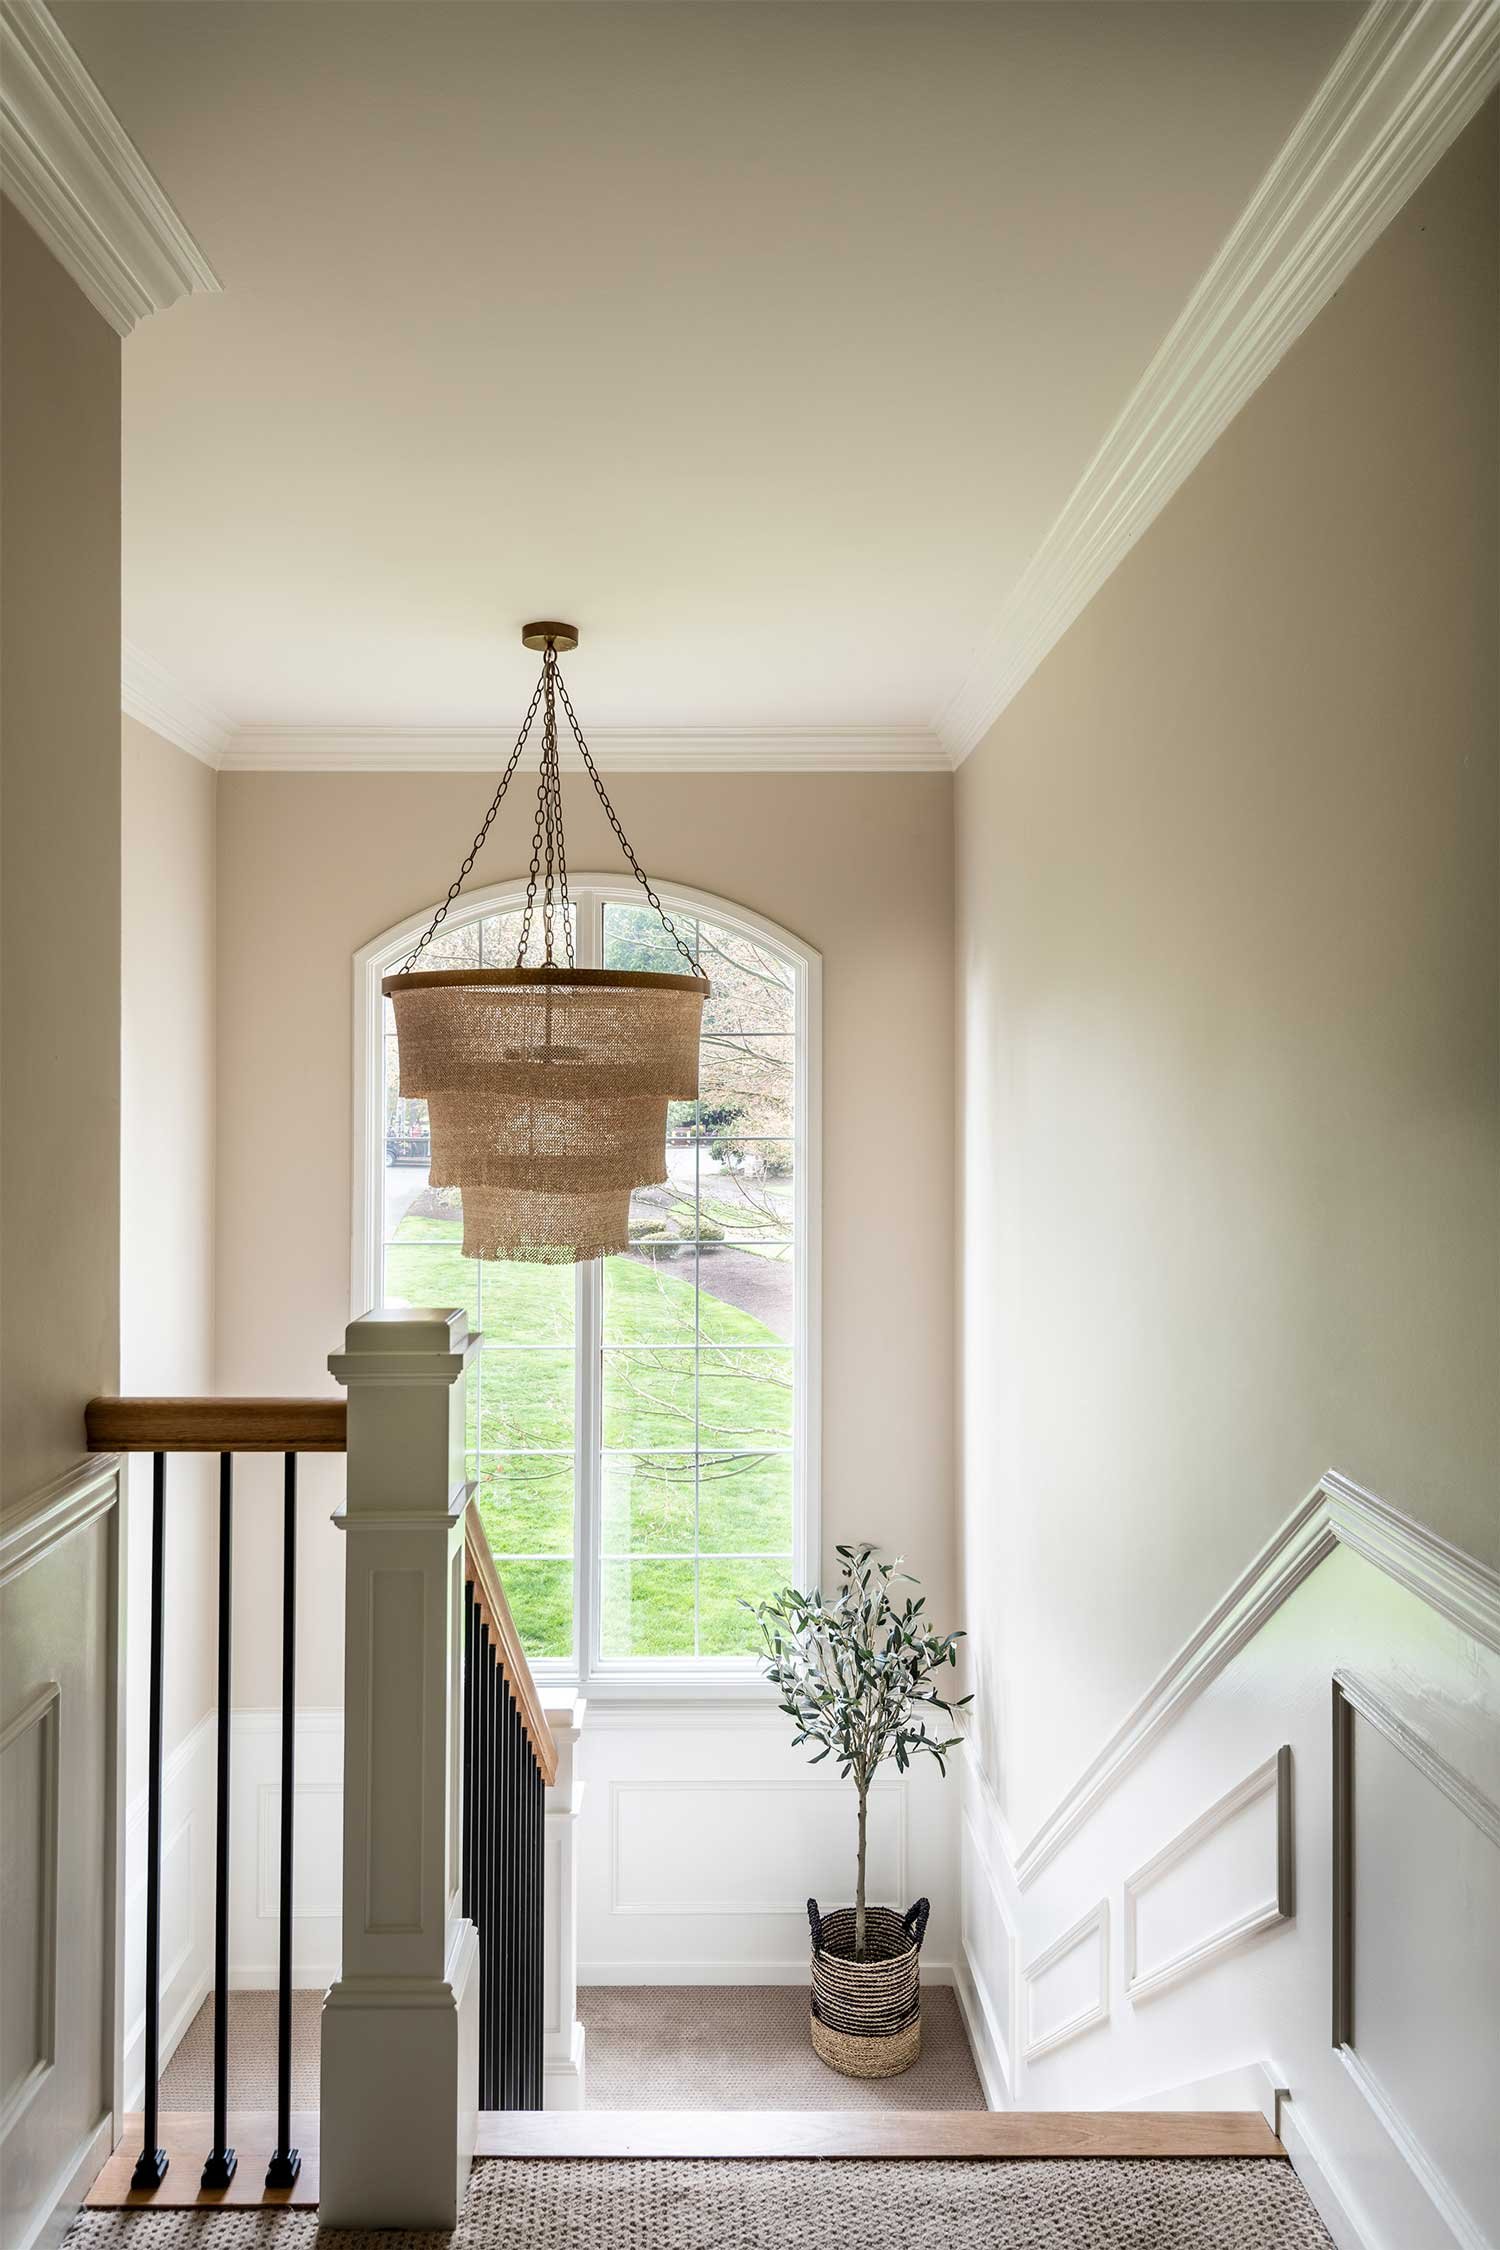 How An Interior Designer Considers Light Fixtures For Your Home